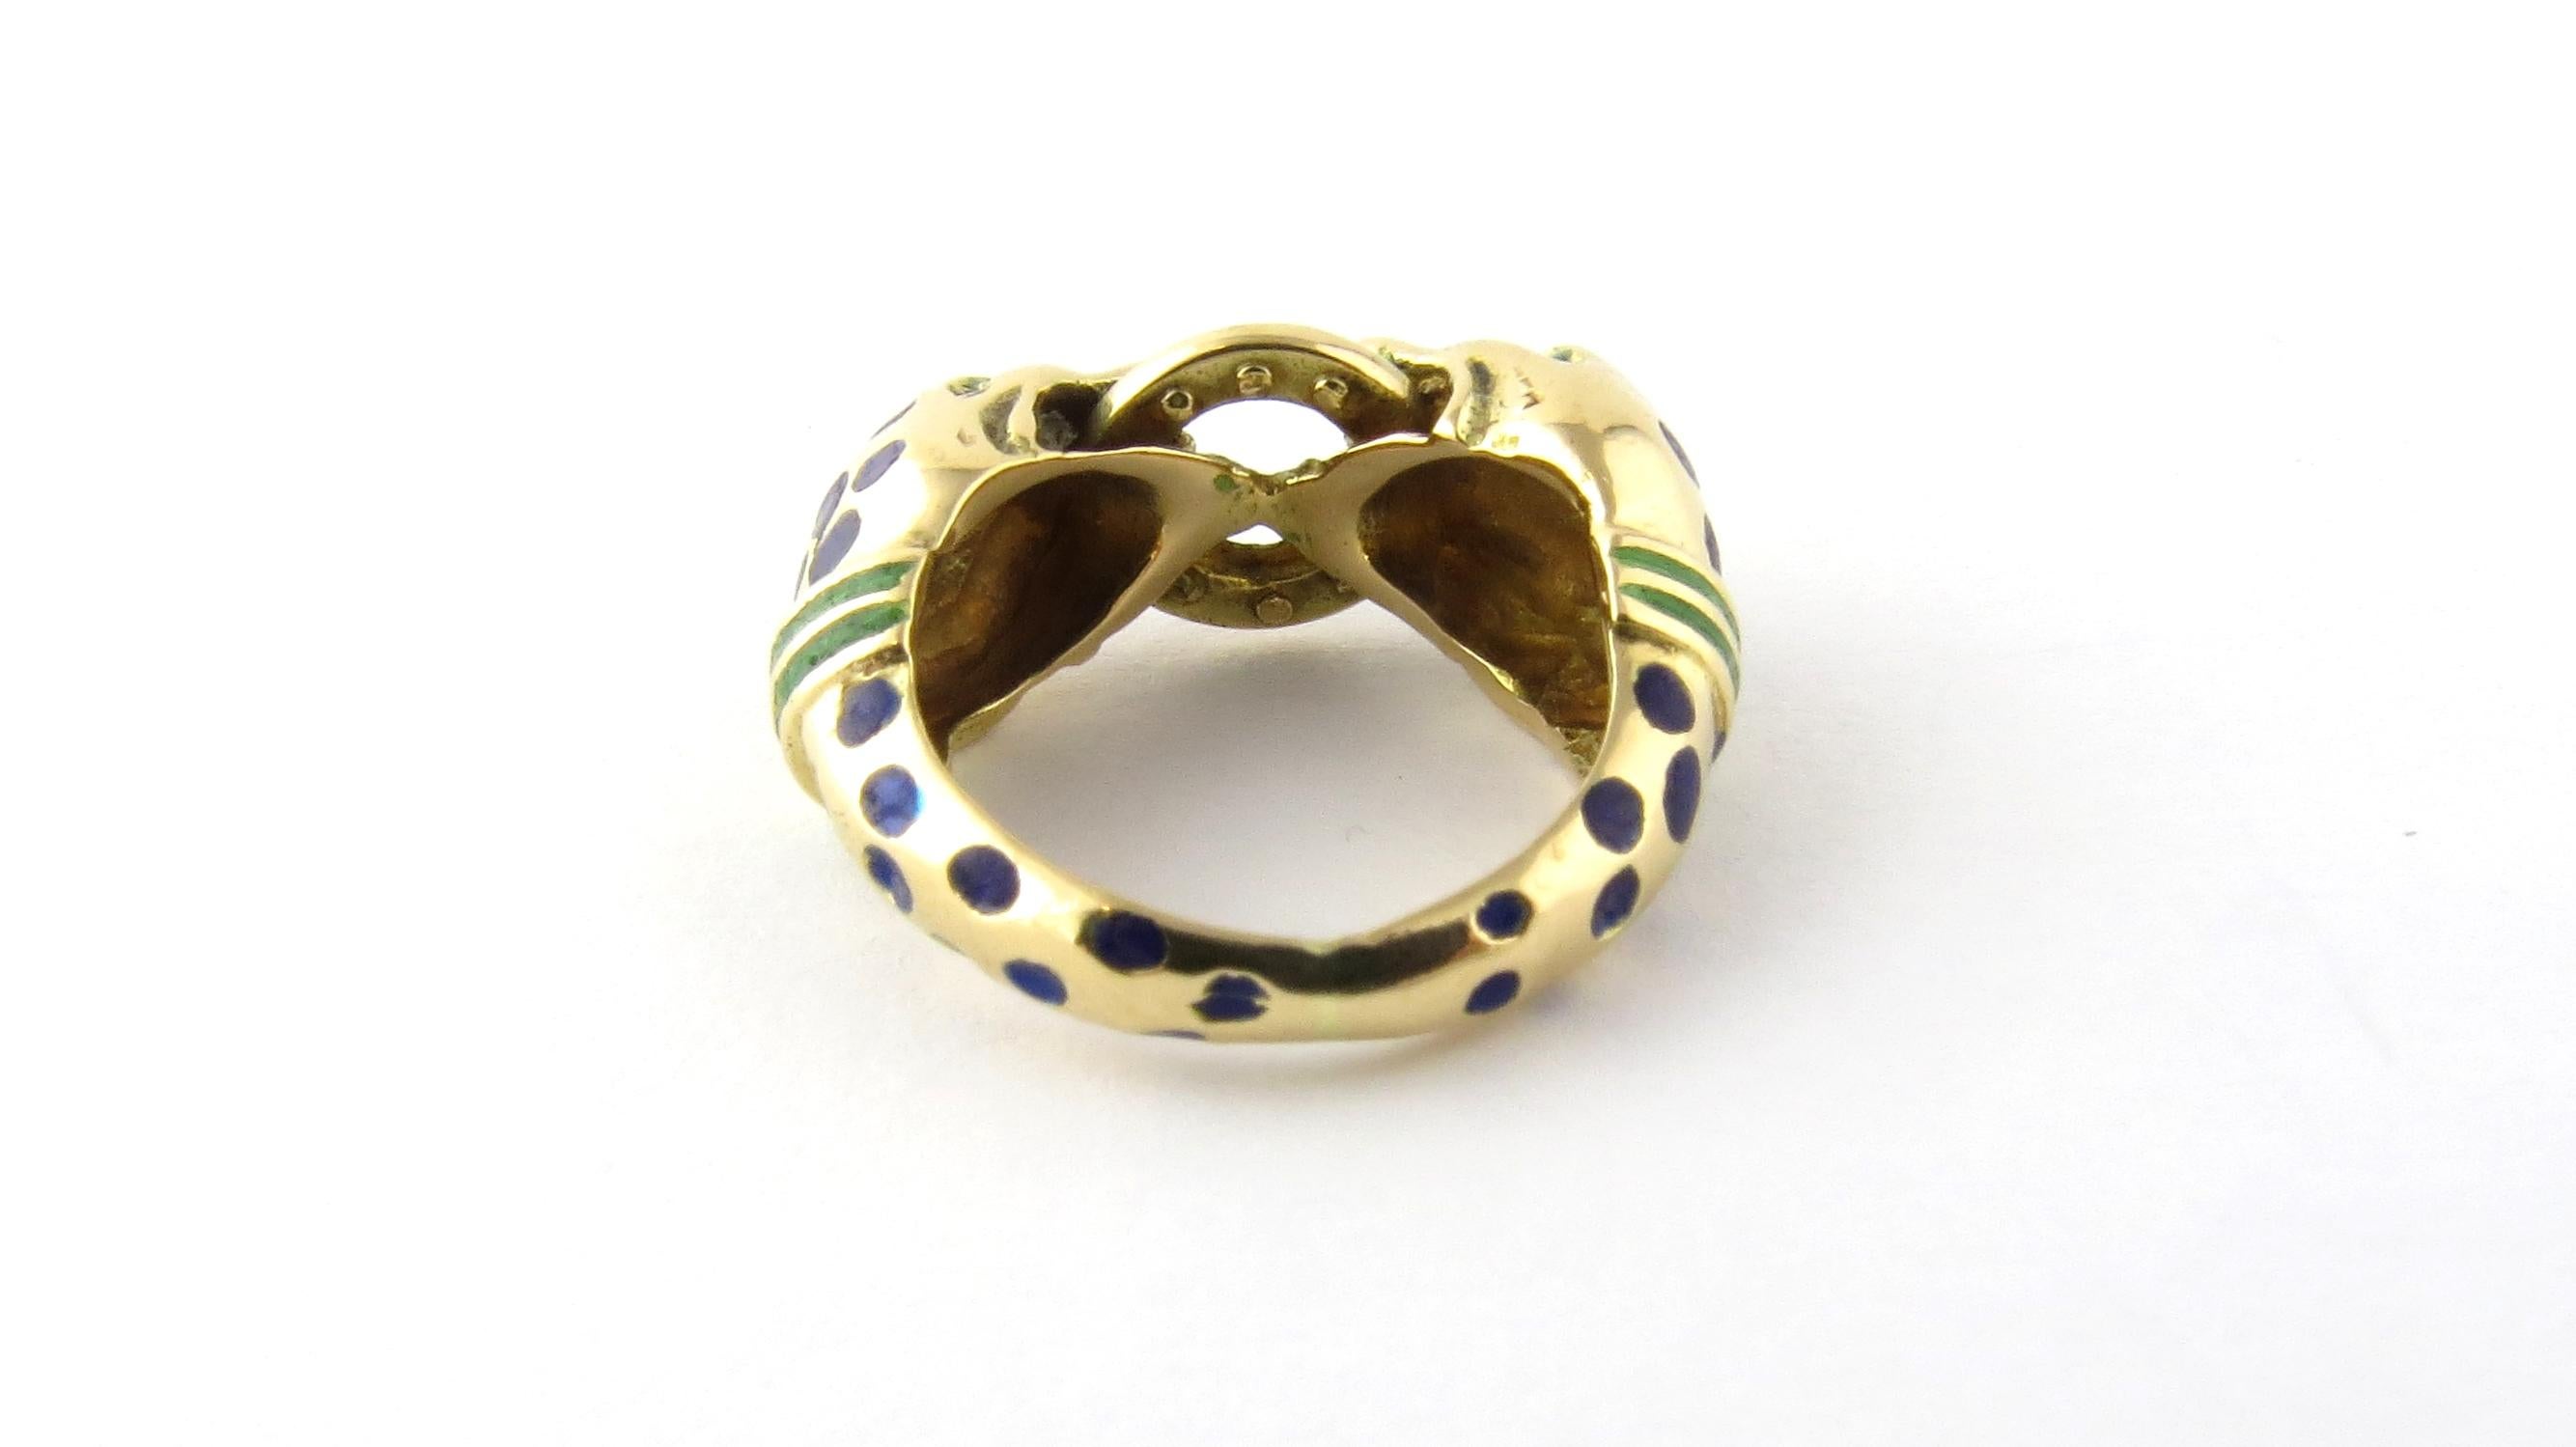 Vintage 18 Karat Yellow Gold Serpent Ring Size 3

This elegant serpent ring is accented with green enamel and crafted in classic 18K yellow gold. 
Width: 10 mm. Shank: 3 mm.

Ring Size: 3

Weight: 5.5 dwt. / 8.6 gr.

Acid tested for 18K gold.

Very